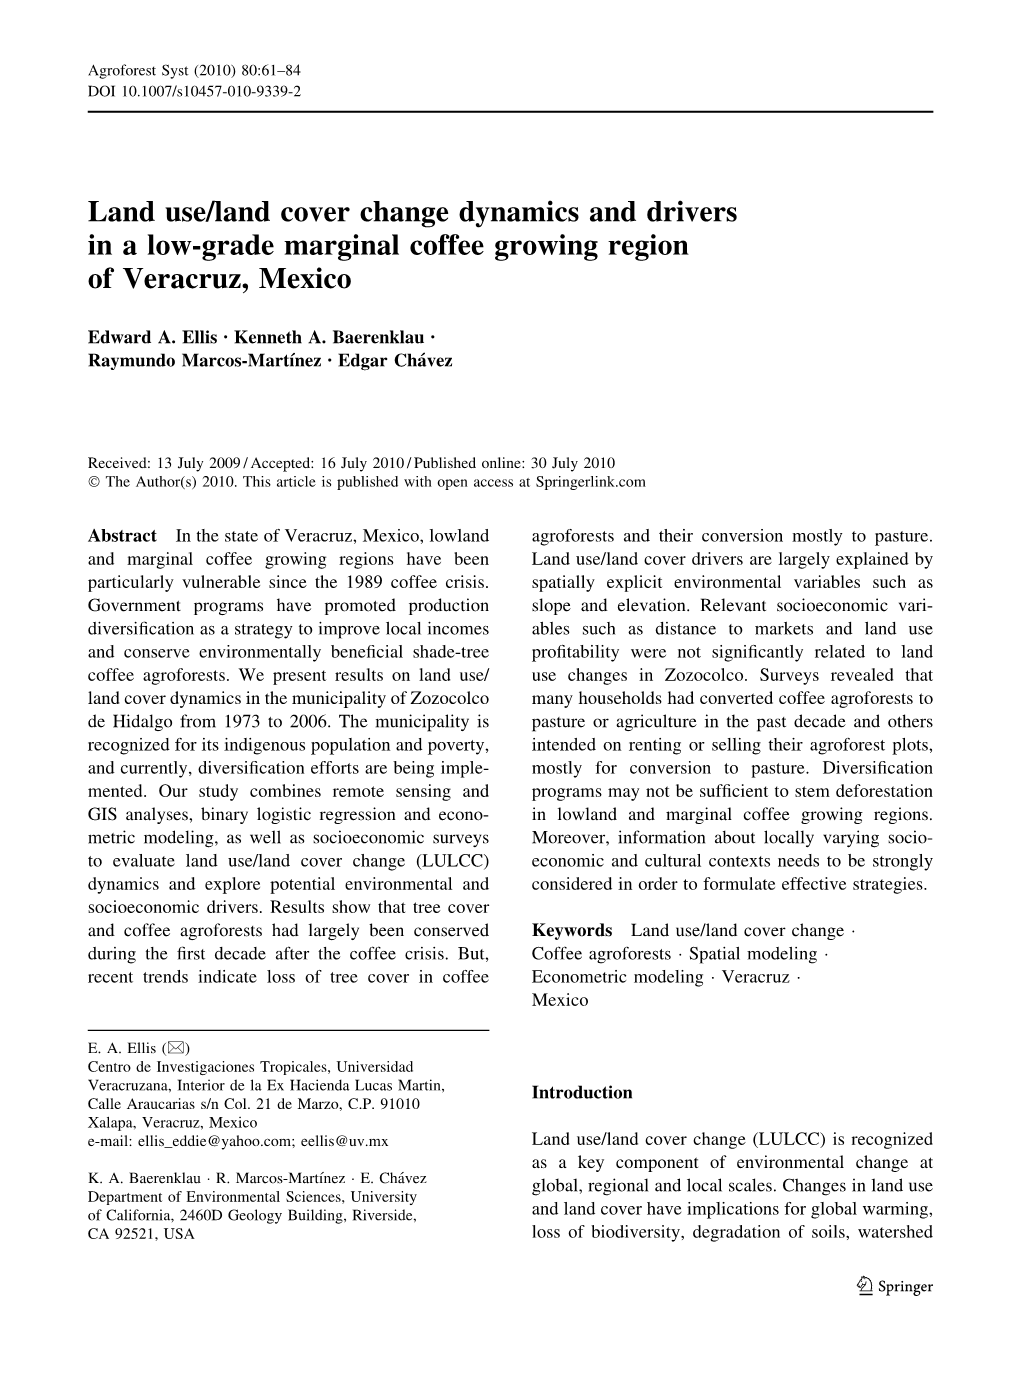 Land Use/Land Cover Change Dynamics and Drivers in a Low-Grade Marginal Coffee Growing Region of Veracruz, Mexico